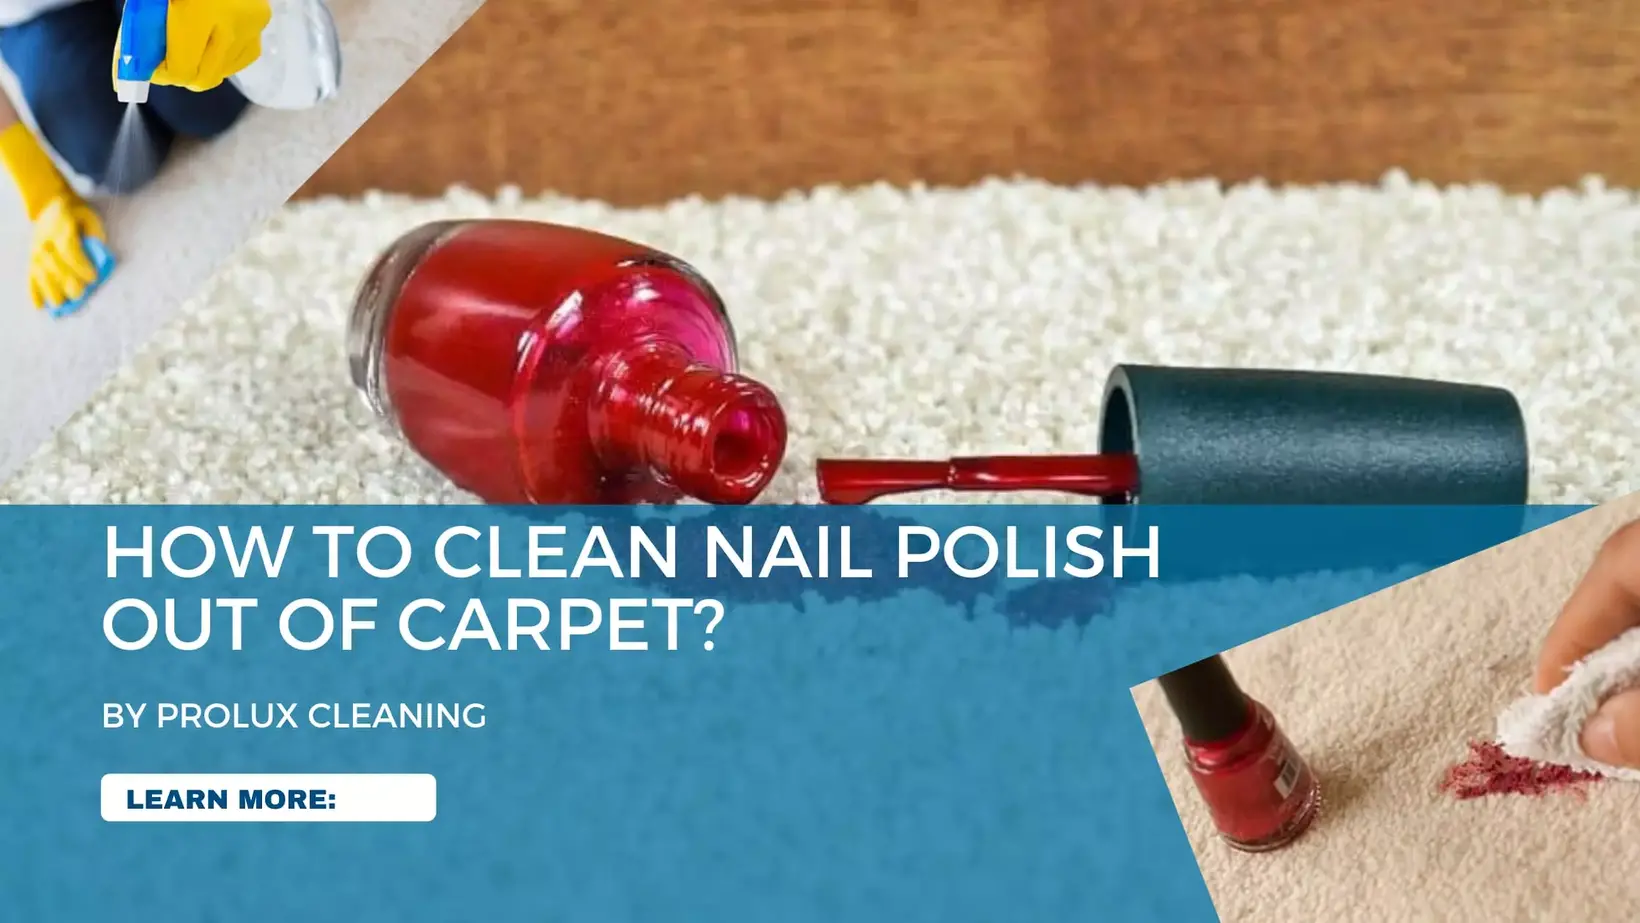 How to Clean Nail Polish out of carpet? | ProLux Cleaning